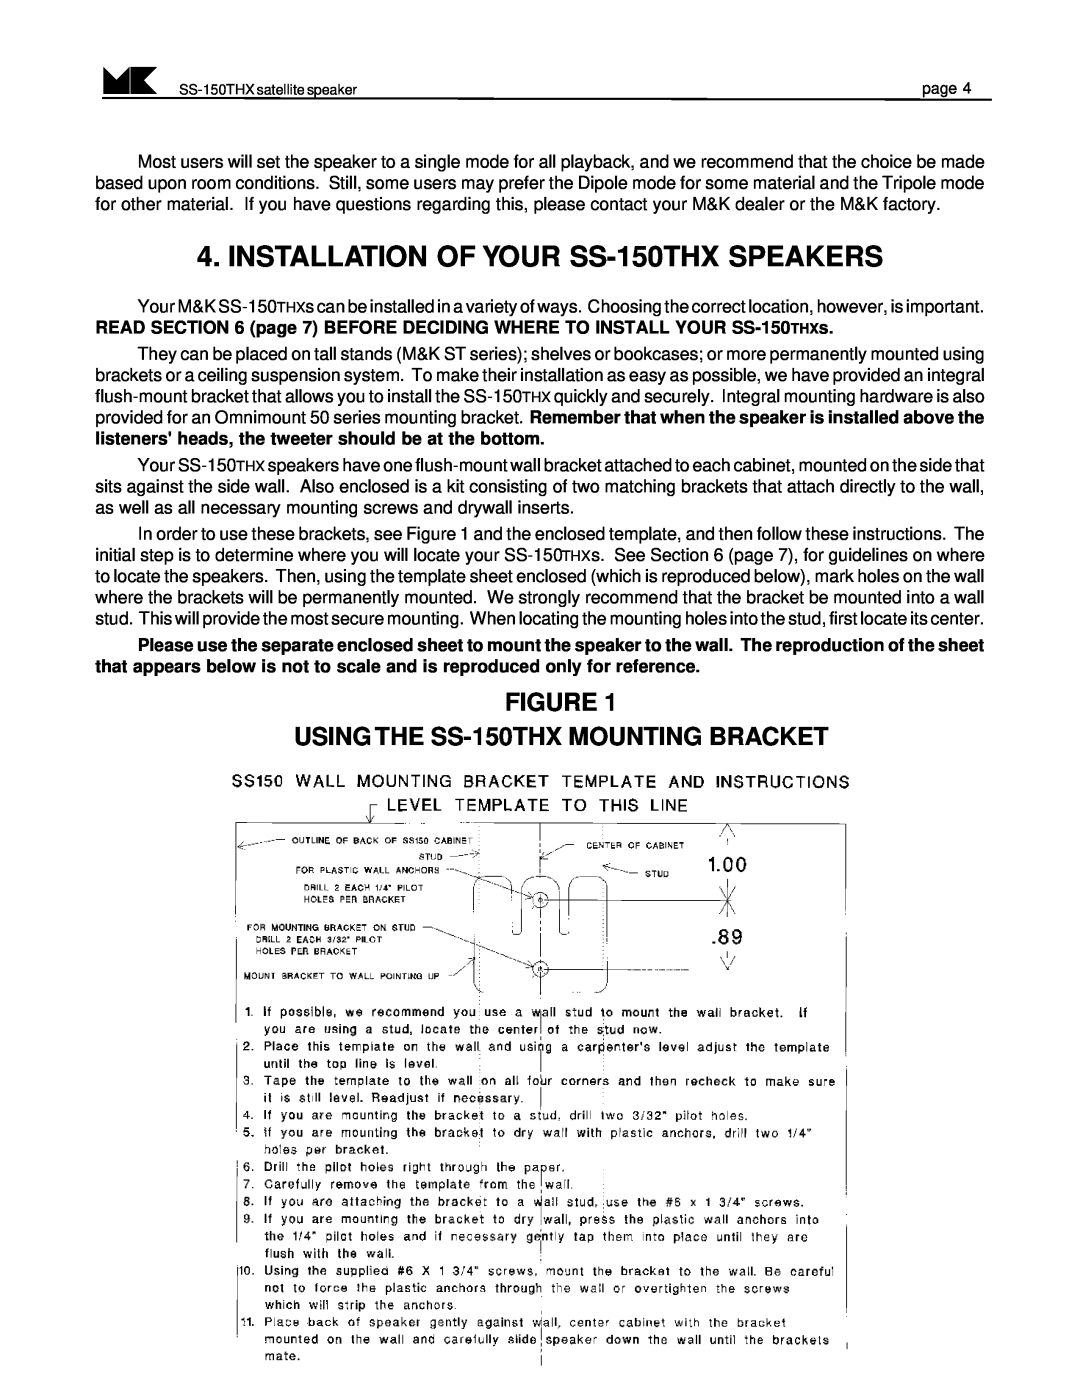 MK Sound operation manual INSTALLATION OF YOUR SS-150THXSPEAKERS, FIGURE USING THE SS-150THXMOUNTING BRACKET 